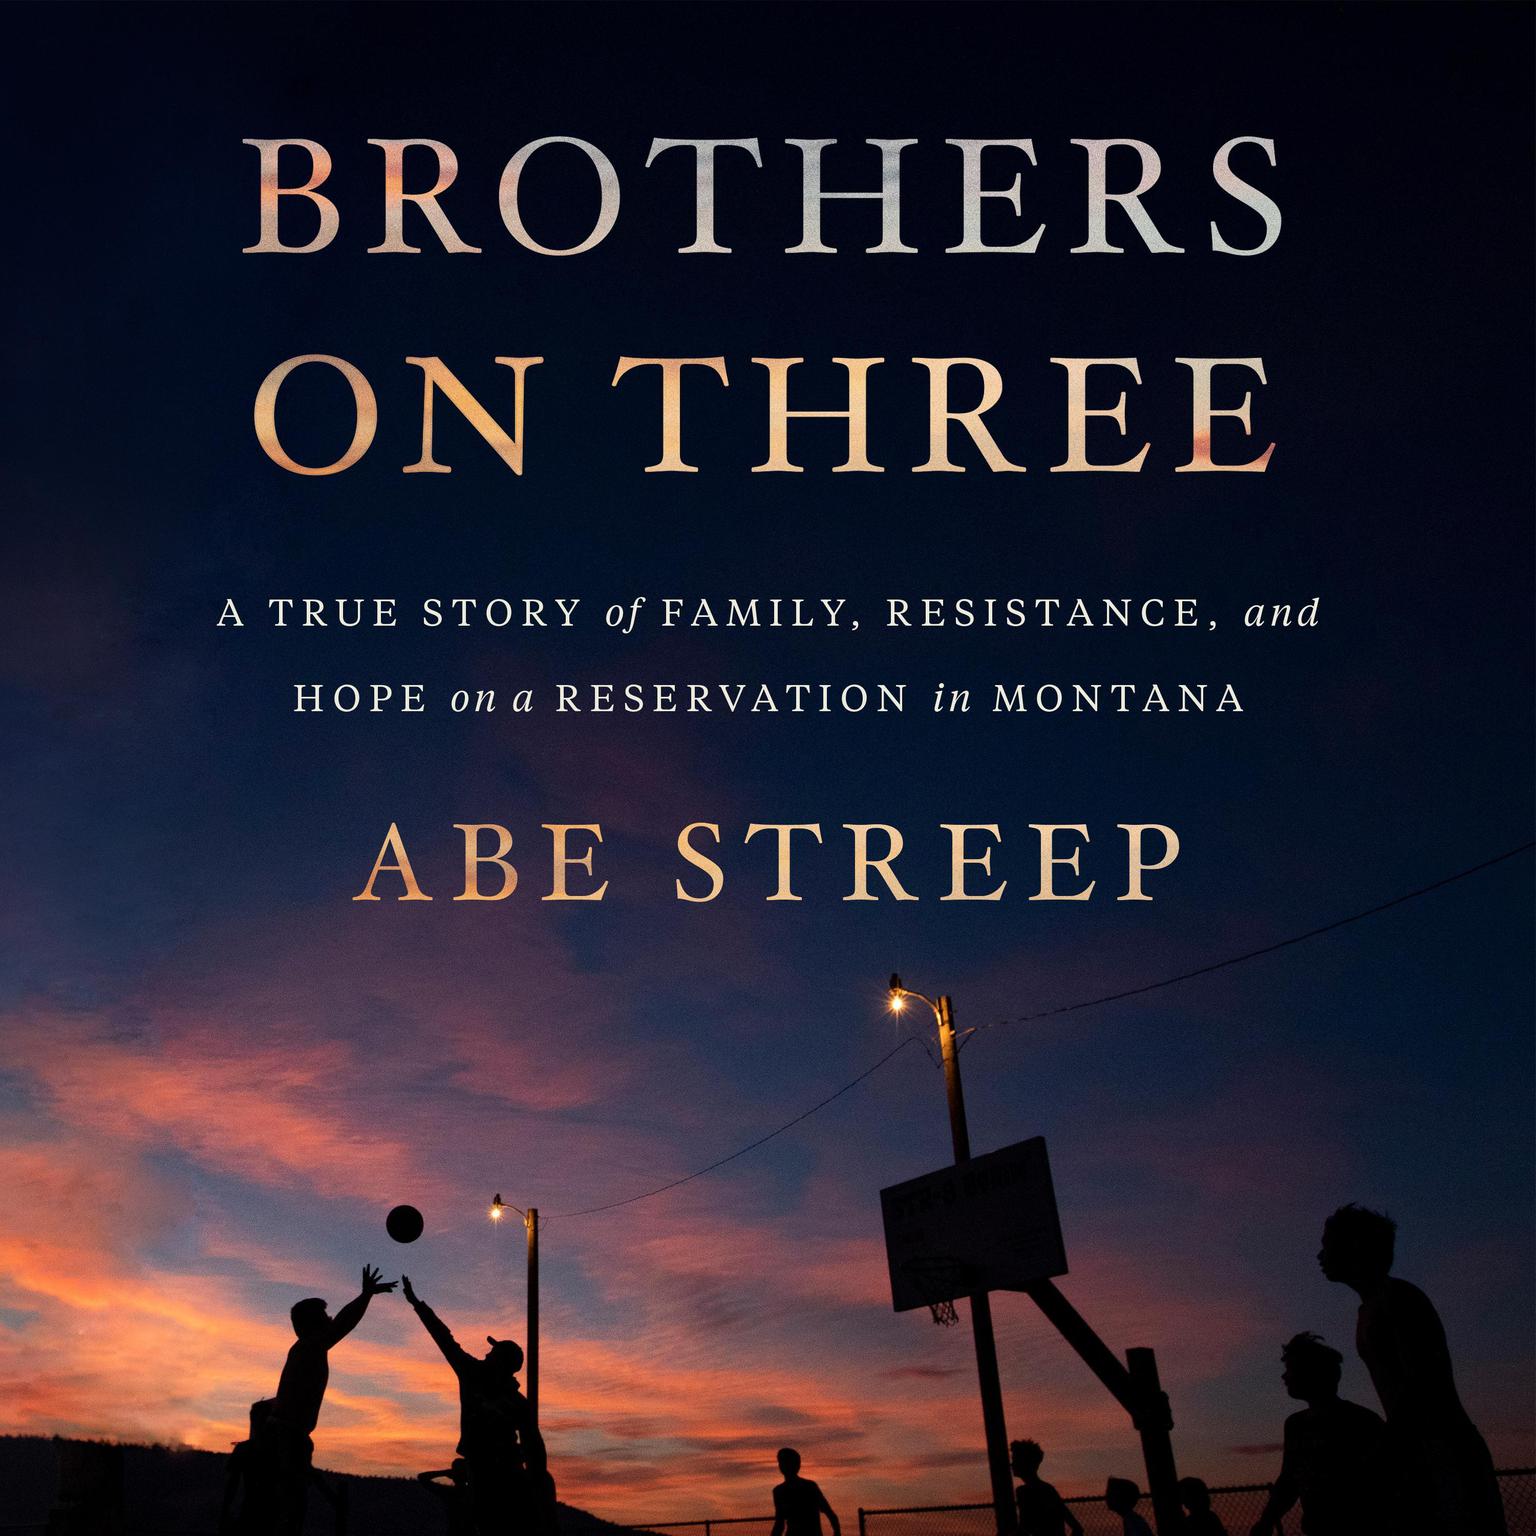 Brothers on Three: A True Story of Family, Resistance, and Hope on a Reservation in Montana Audiobook, by Abe Streep